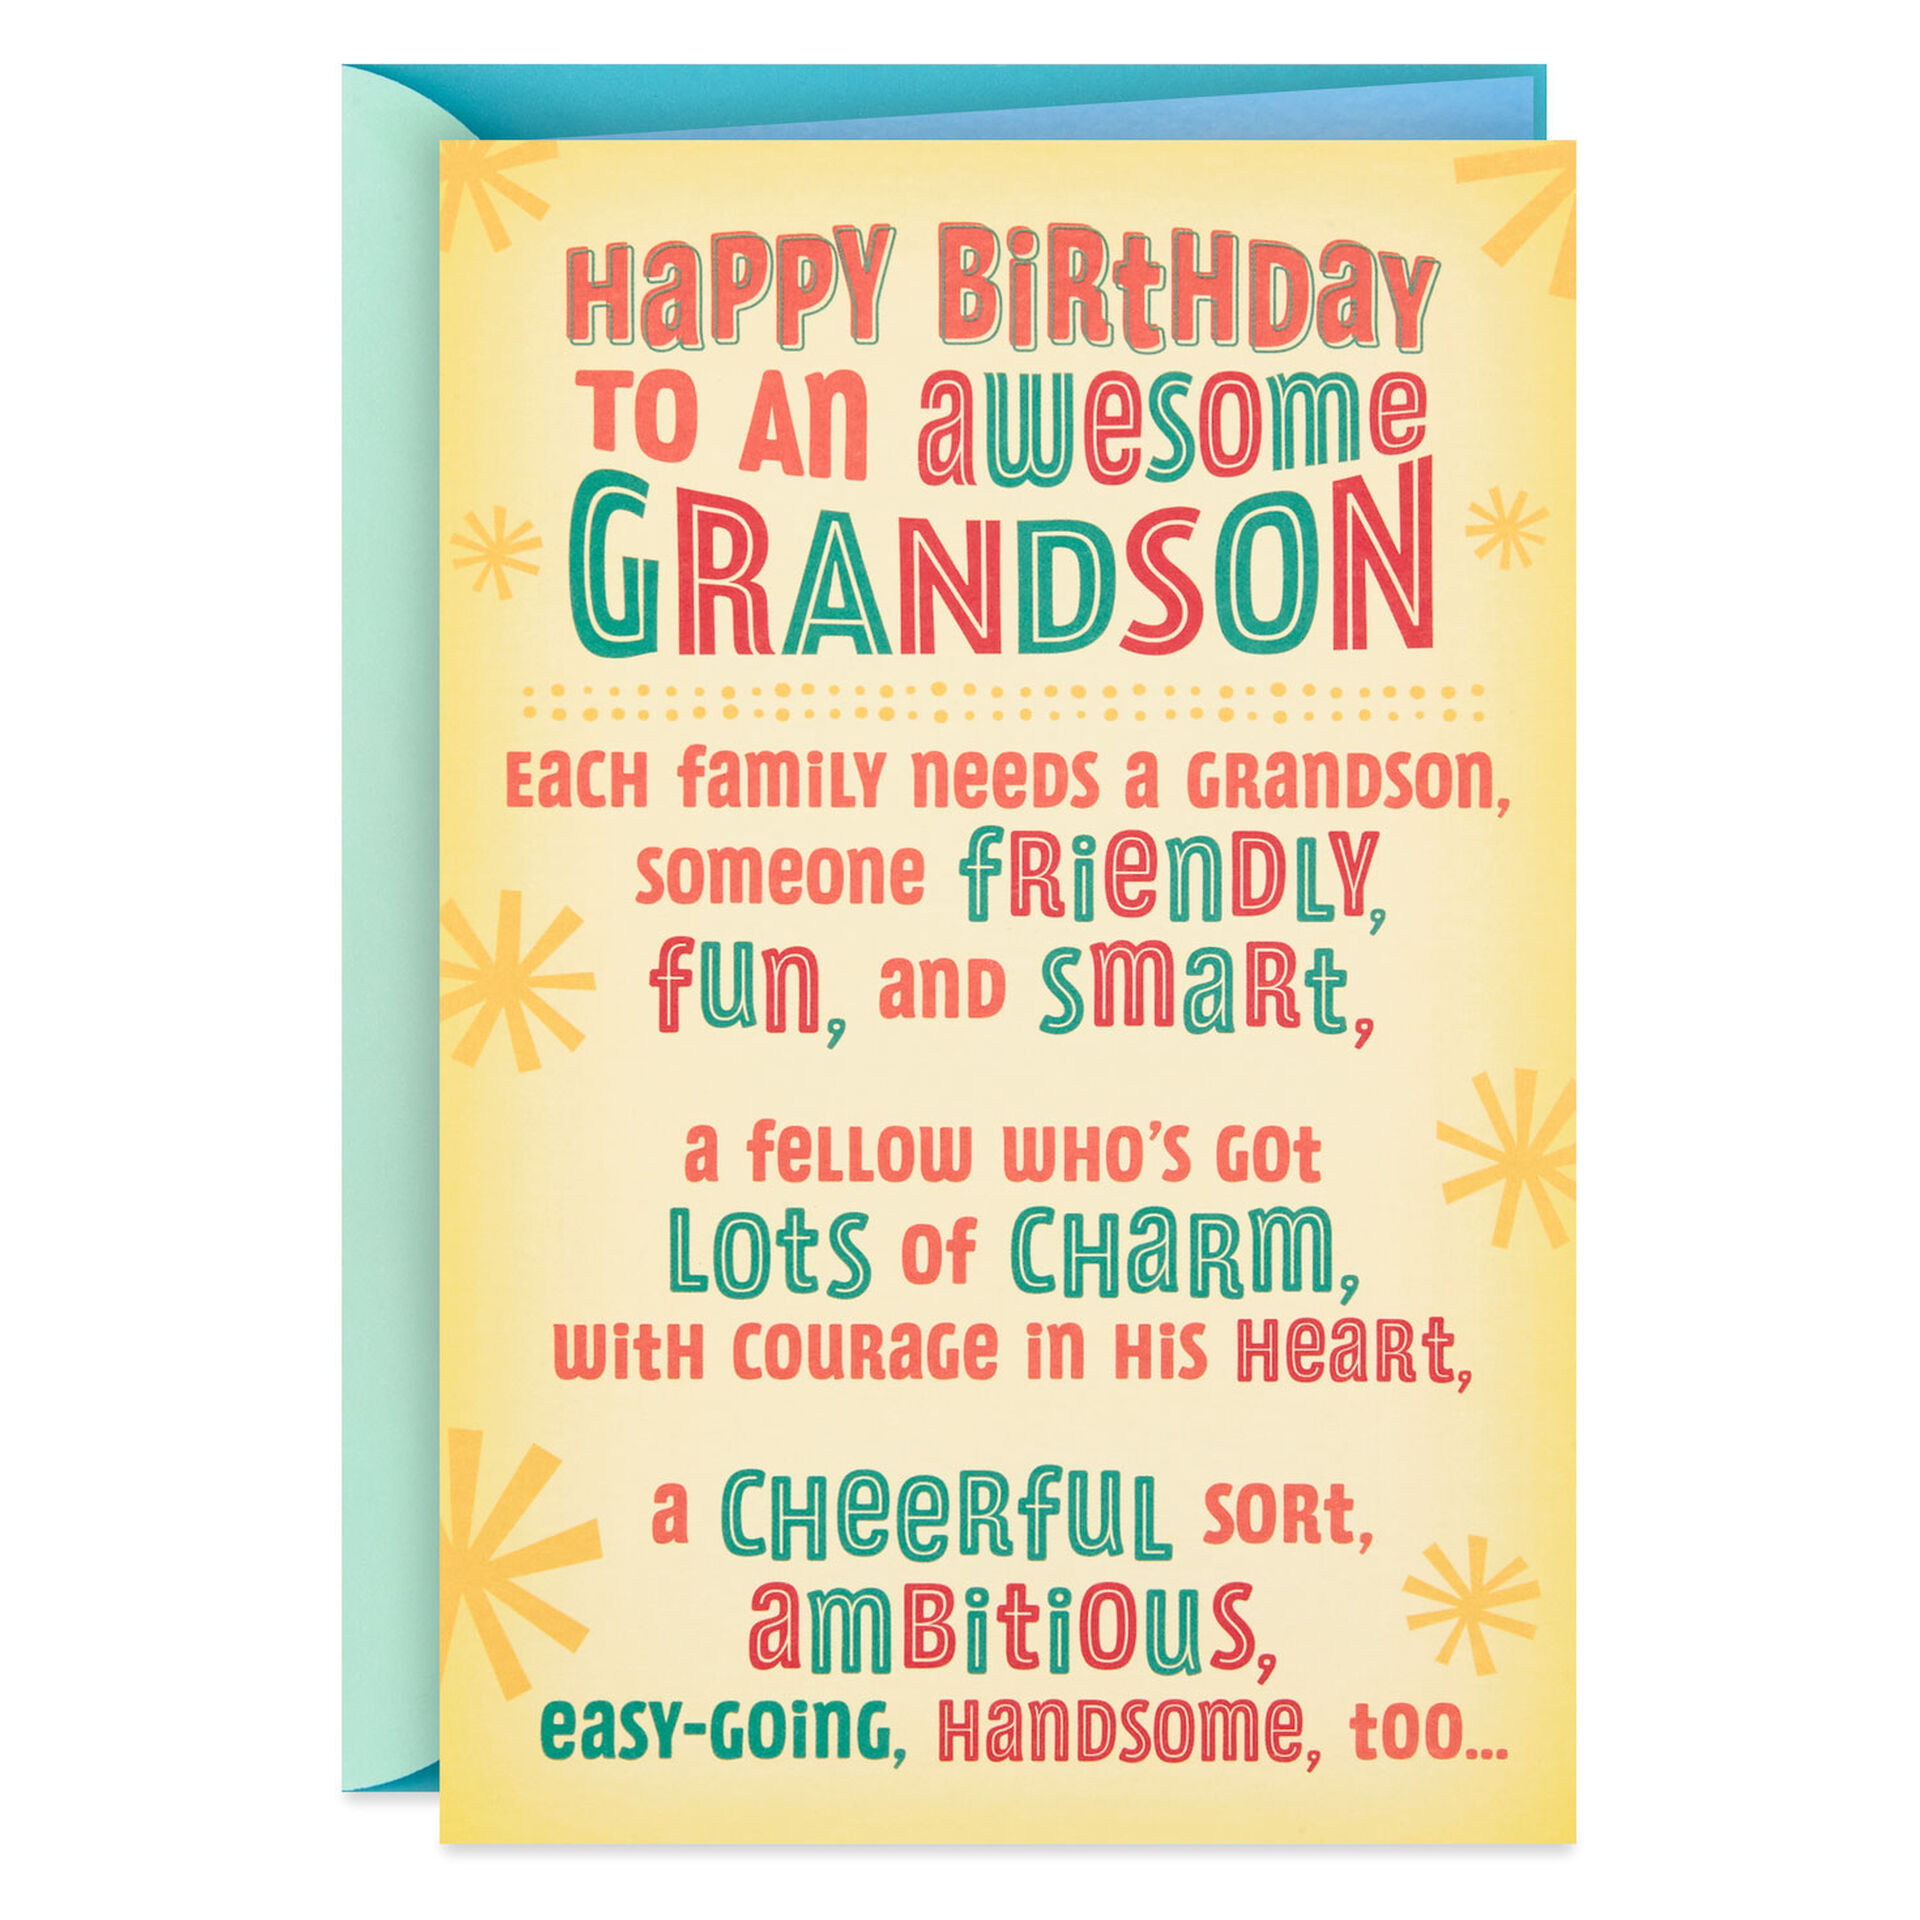 GRANDSON BIRTHDAY CARD Home Furniture DIY Celebrations Occasions